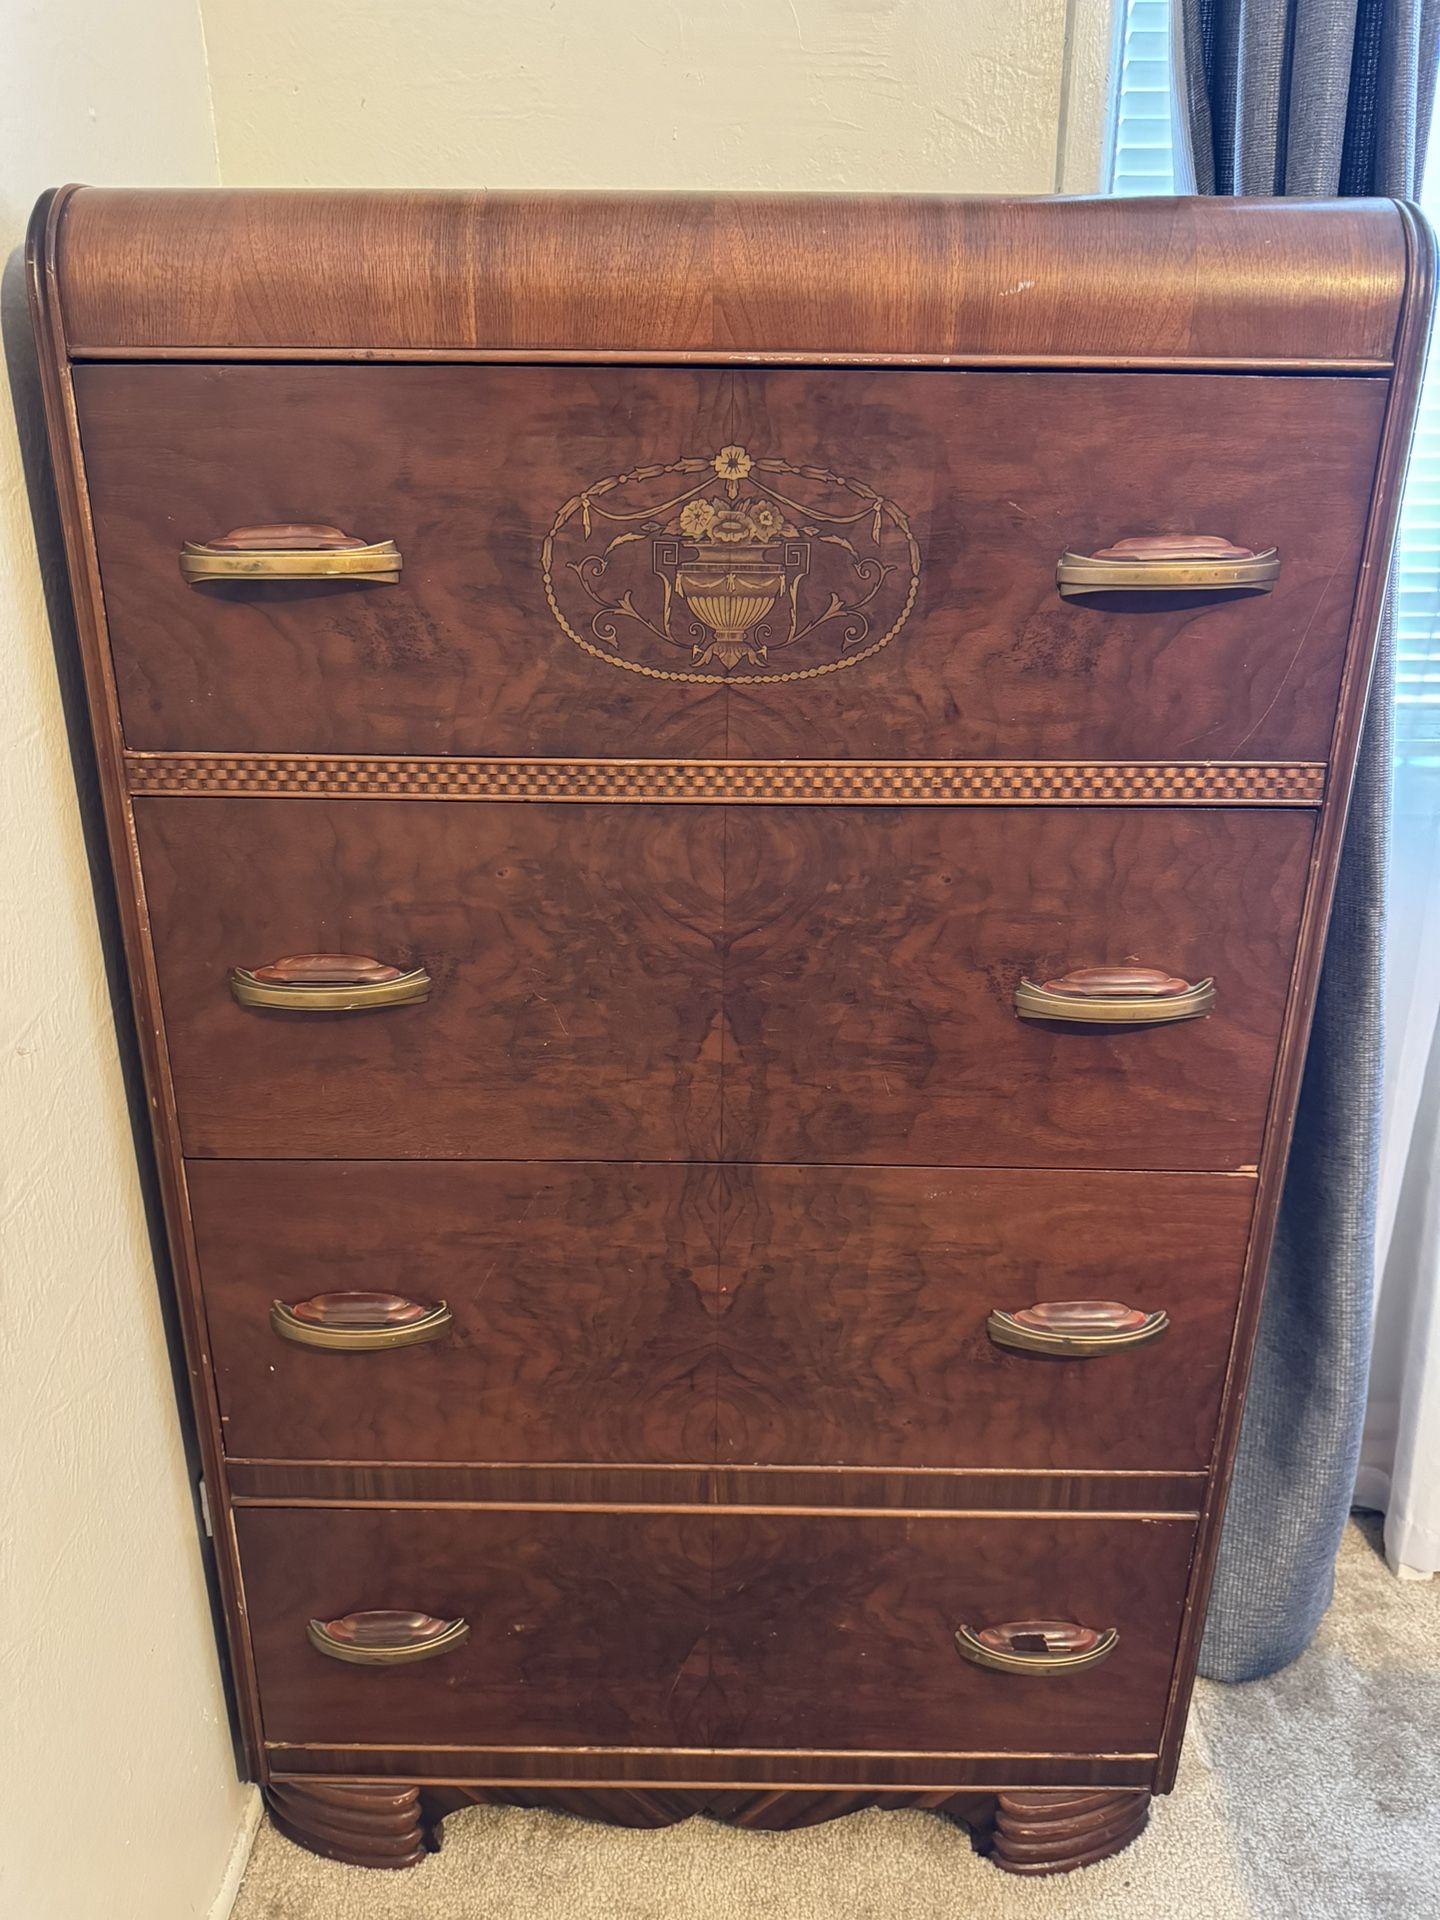 Two Solid Wood Dressers